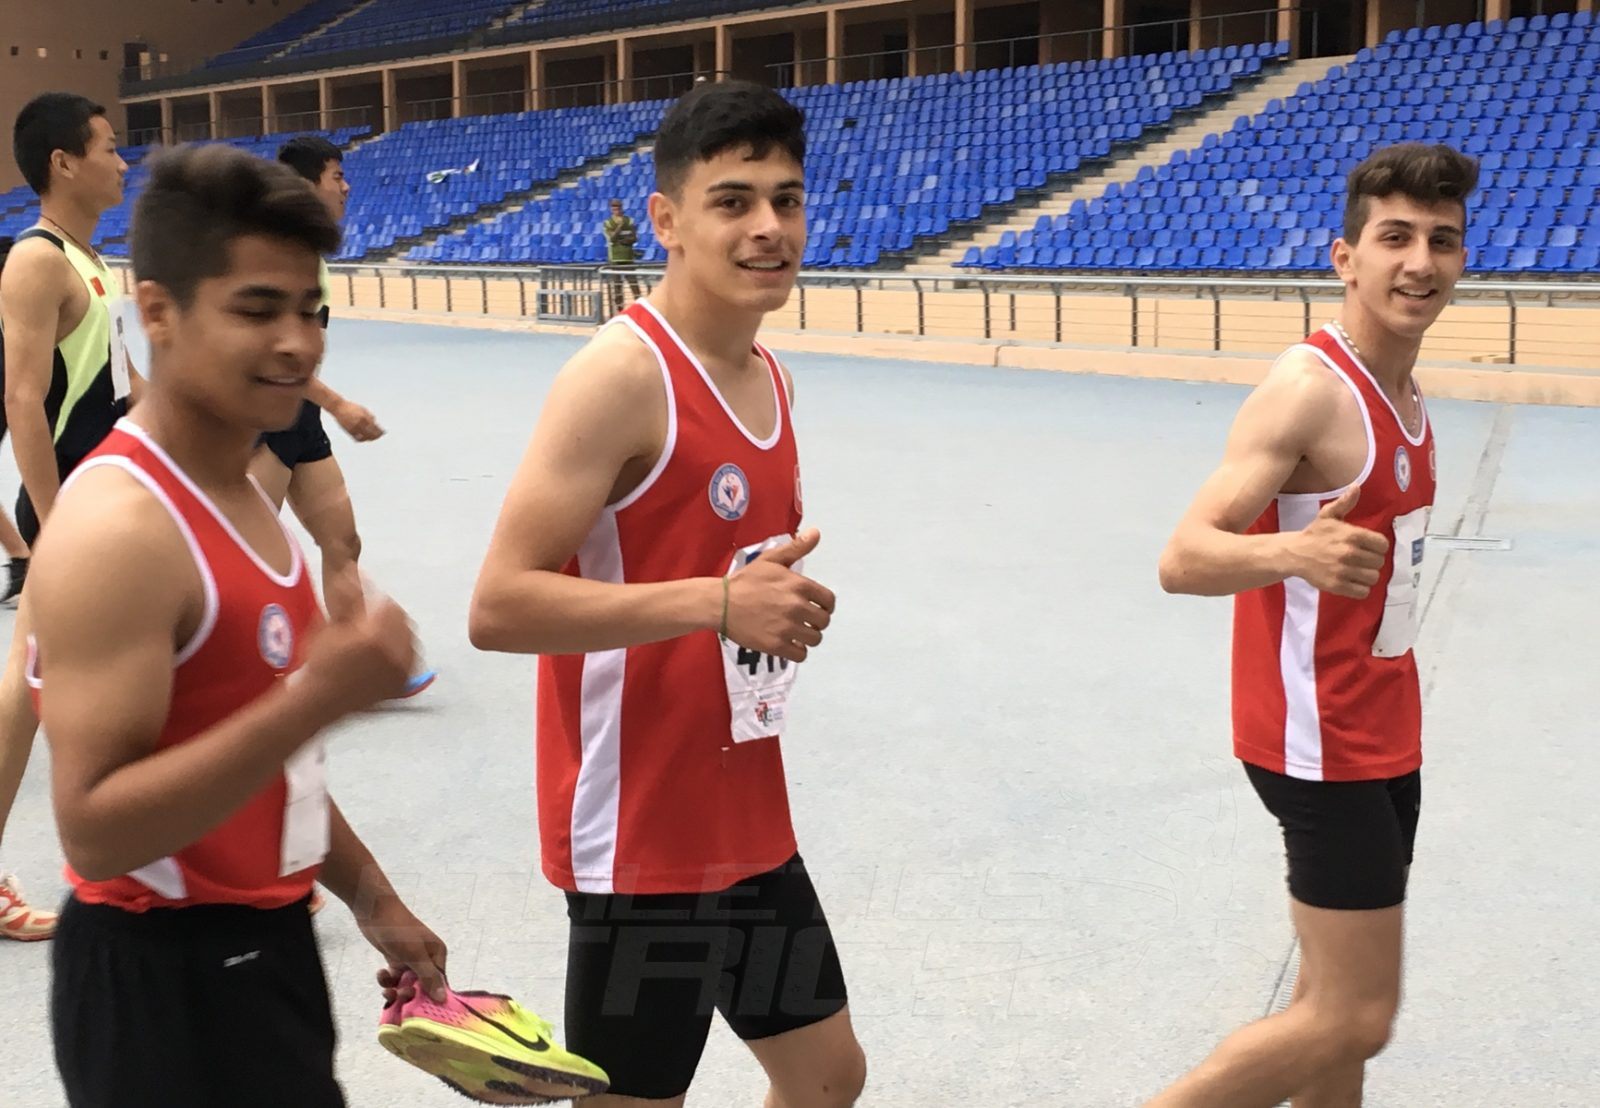 The Tunisian quartet after the Boys 4x100m final at Gymnasiade 2018 in Marrakech / Photo Credit: Yomi Omogbeja